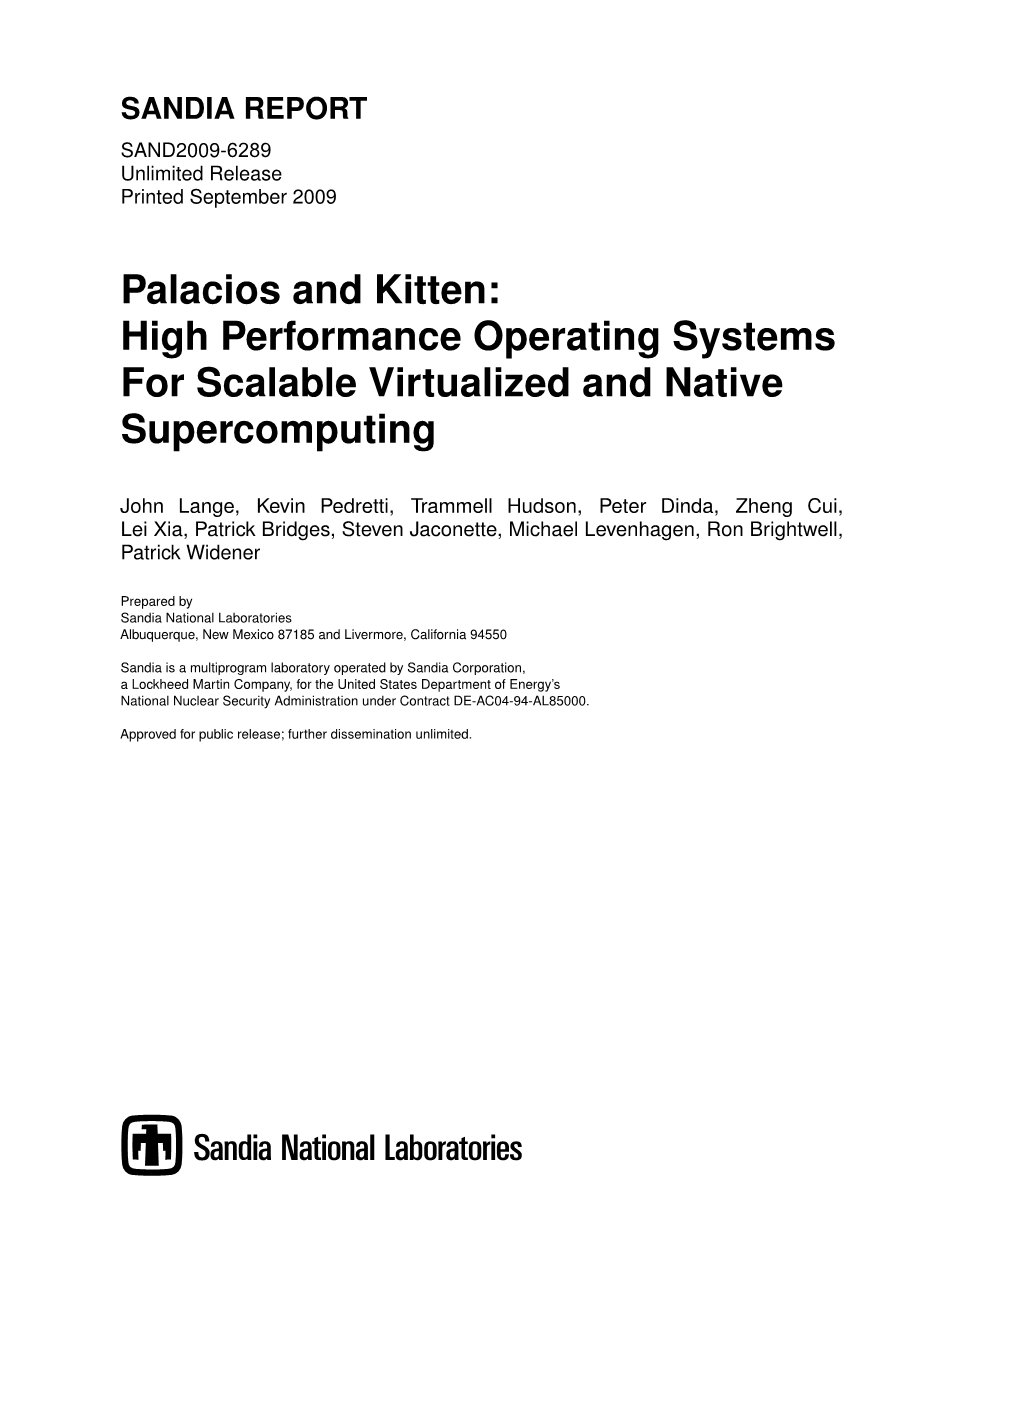 Palacios and Kitten: High Performance Operating Systems for Scalable Virtualized and Native Supercomputing